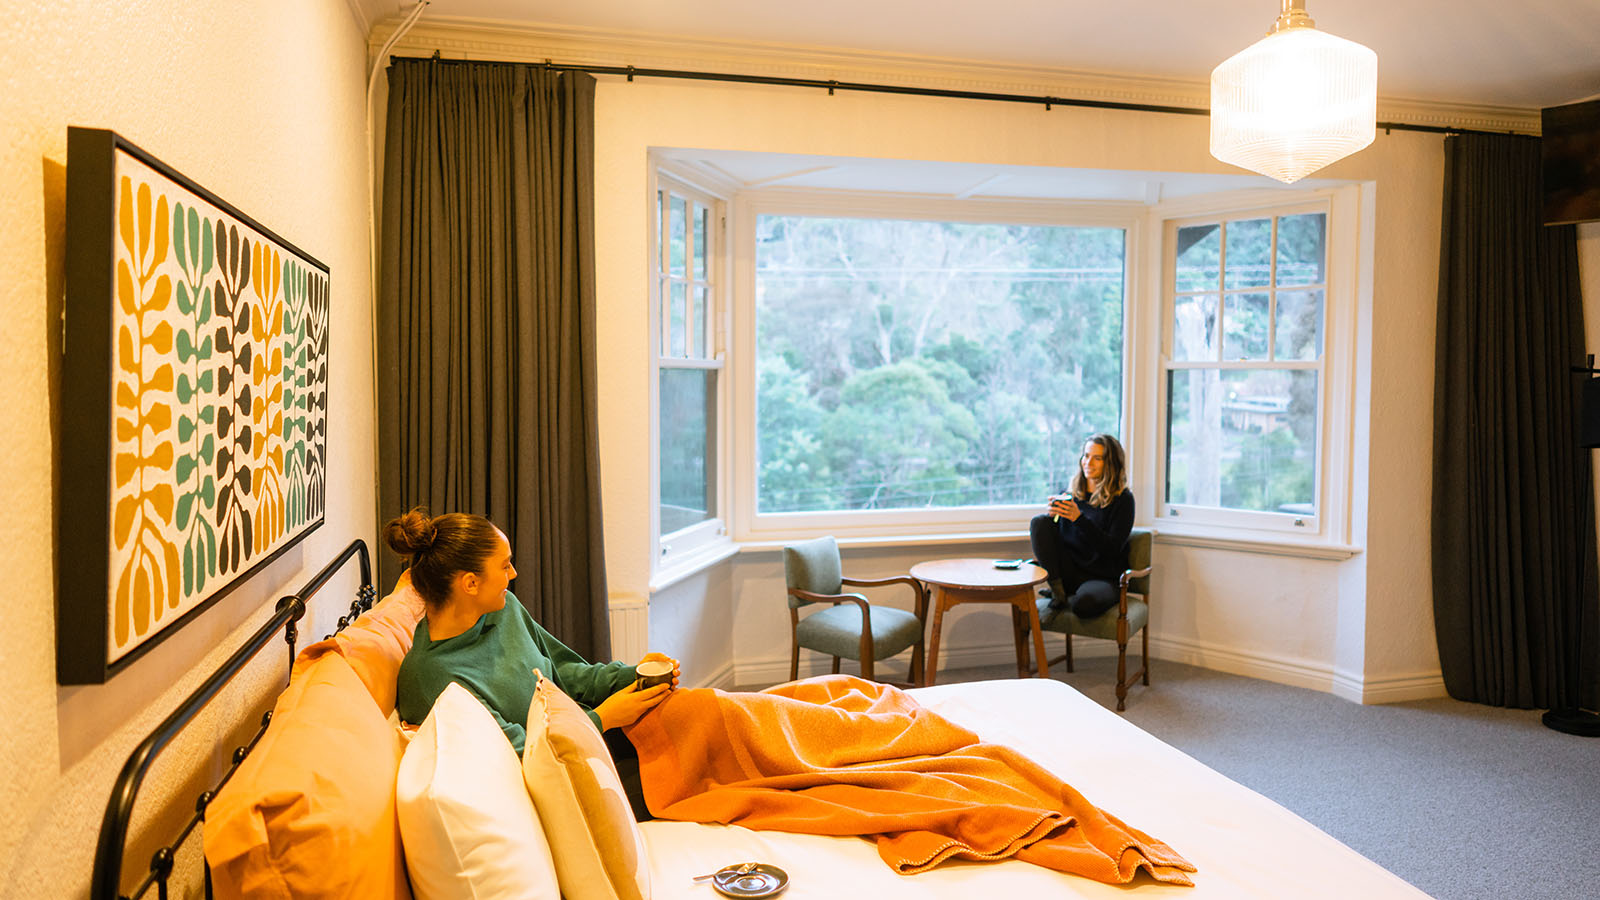 Alpine Hotel, Yarra Valley and the Dandenong Ranges, Victoria